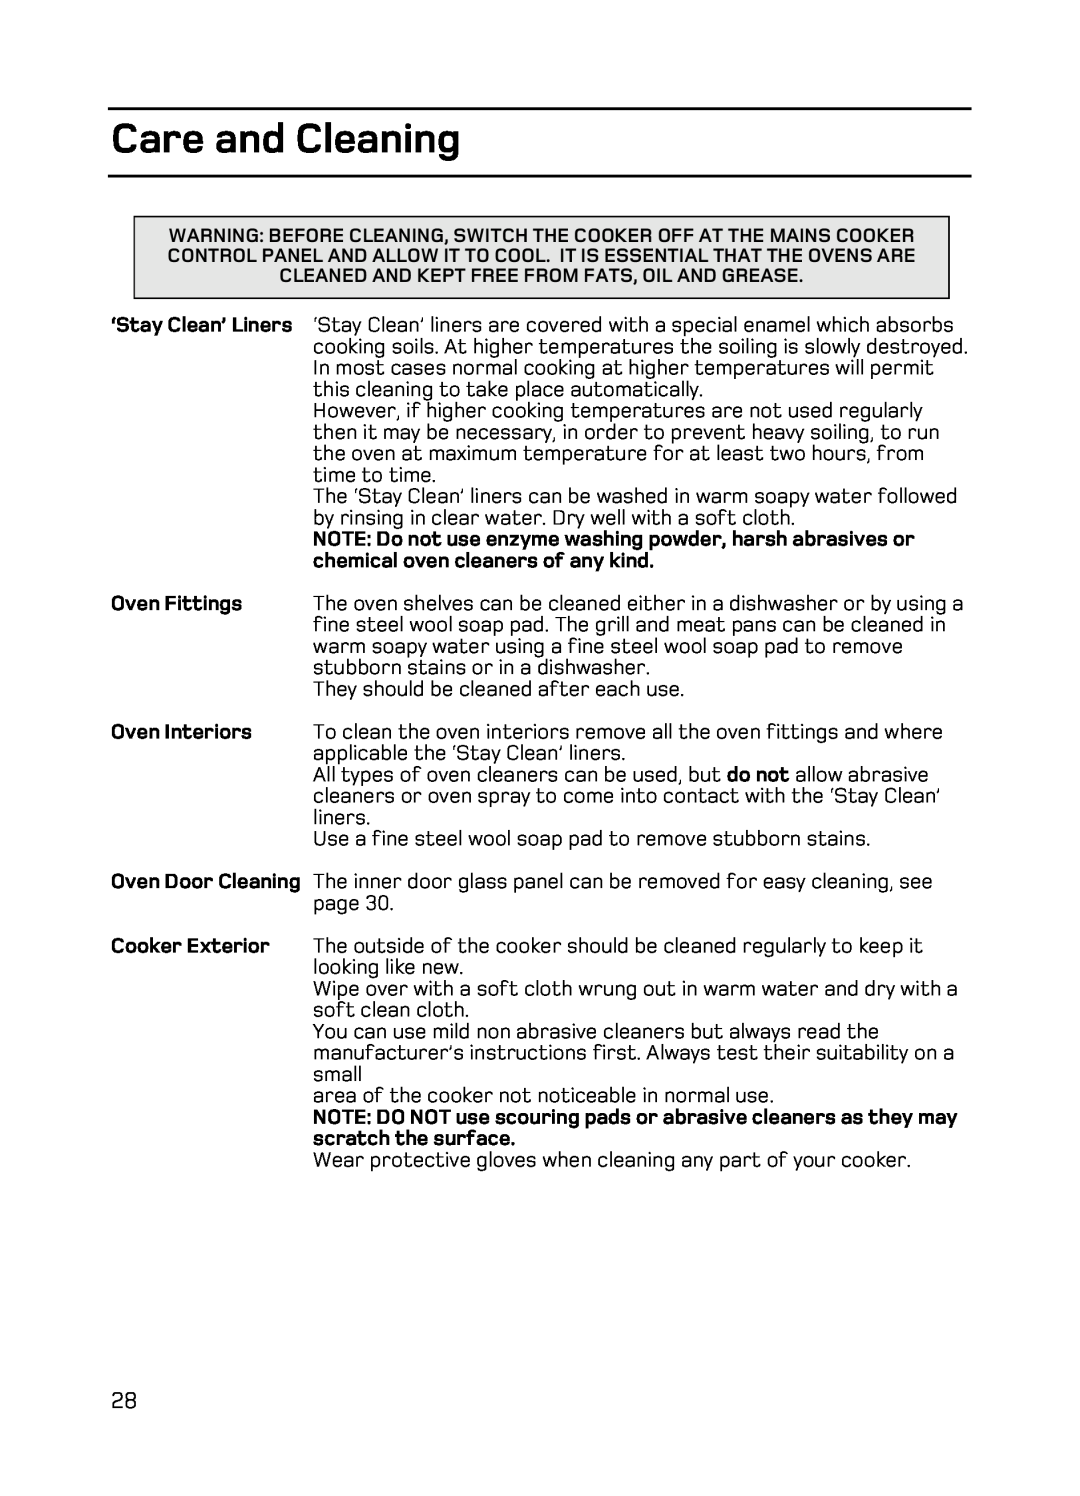 Hotpoint EG94 manual Care and Cleaning, ‘Stay Clean’ Liners, NOTE Do not use enzyme washing powder, harsh abrasives or 